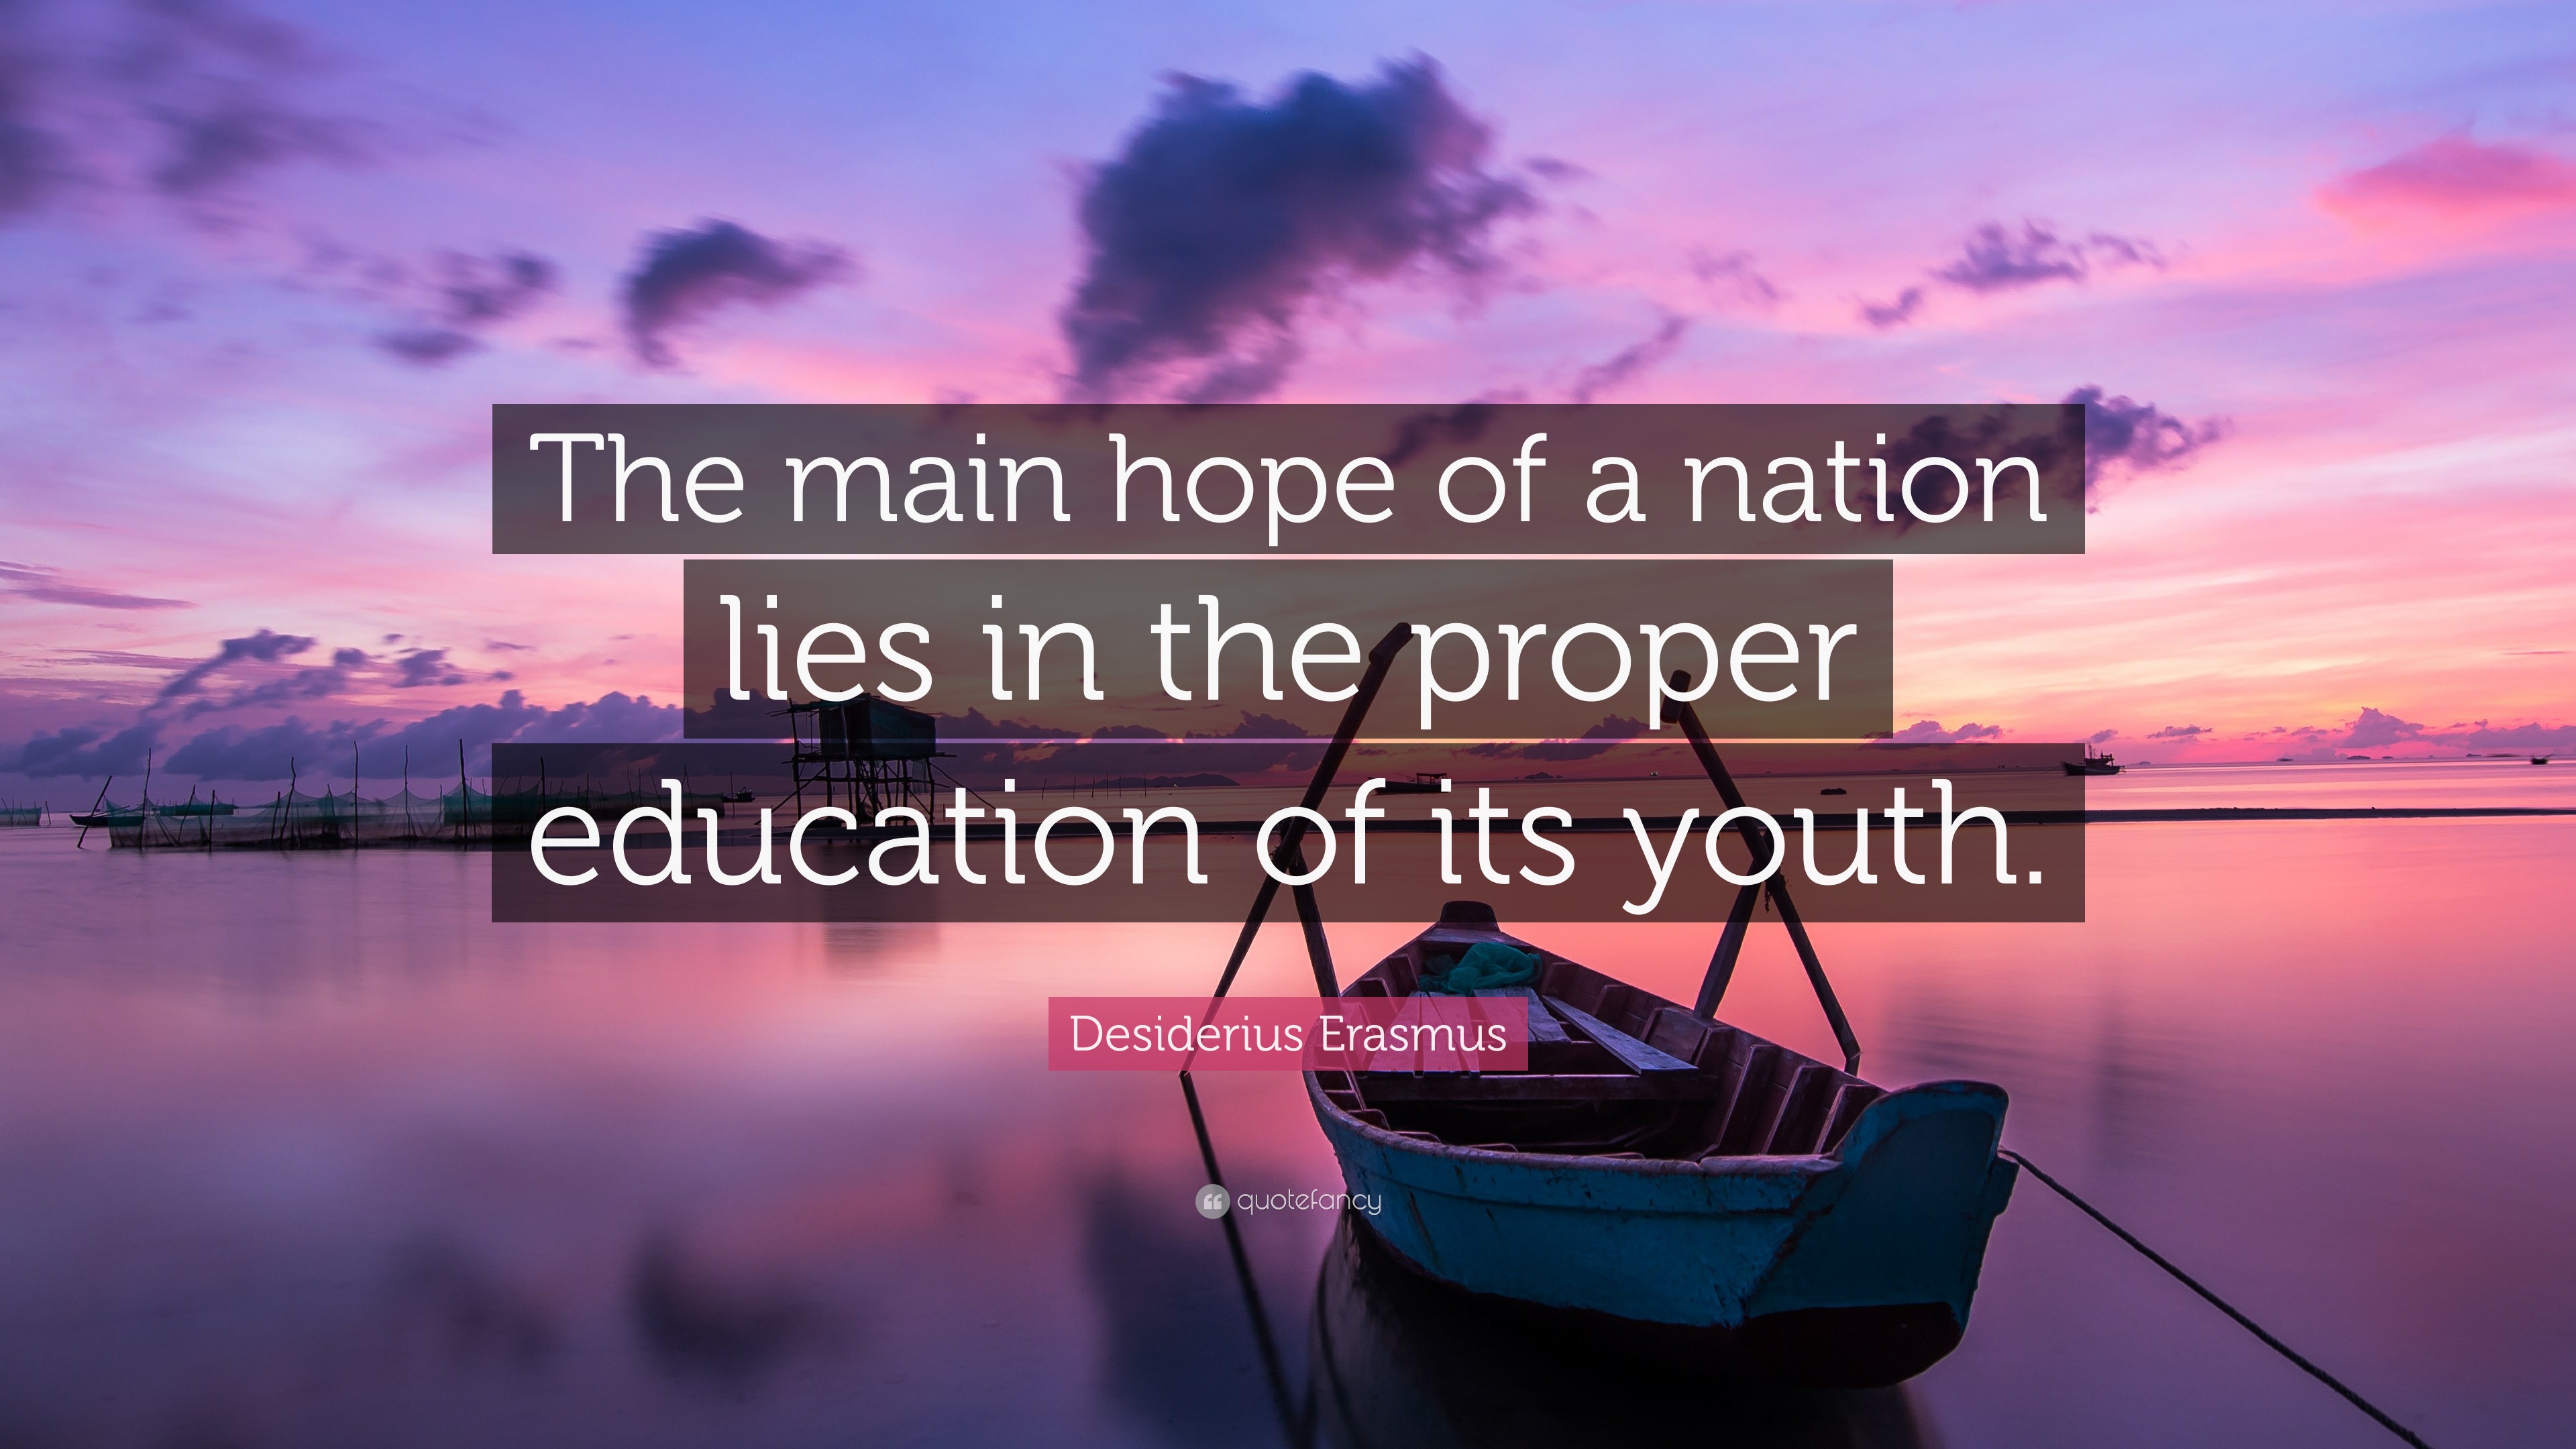 Desiderius Erasmus Quote: “The main hope of a nation lies in the proper